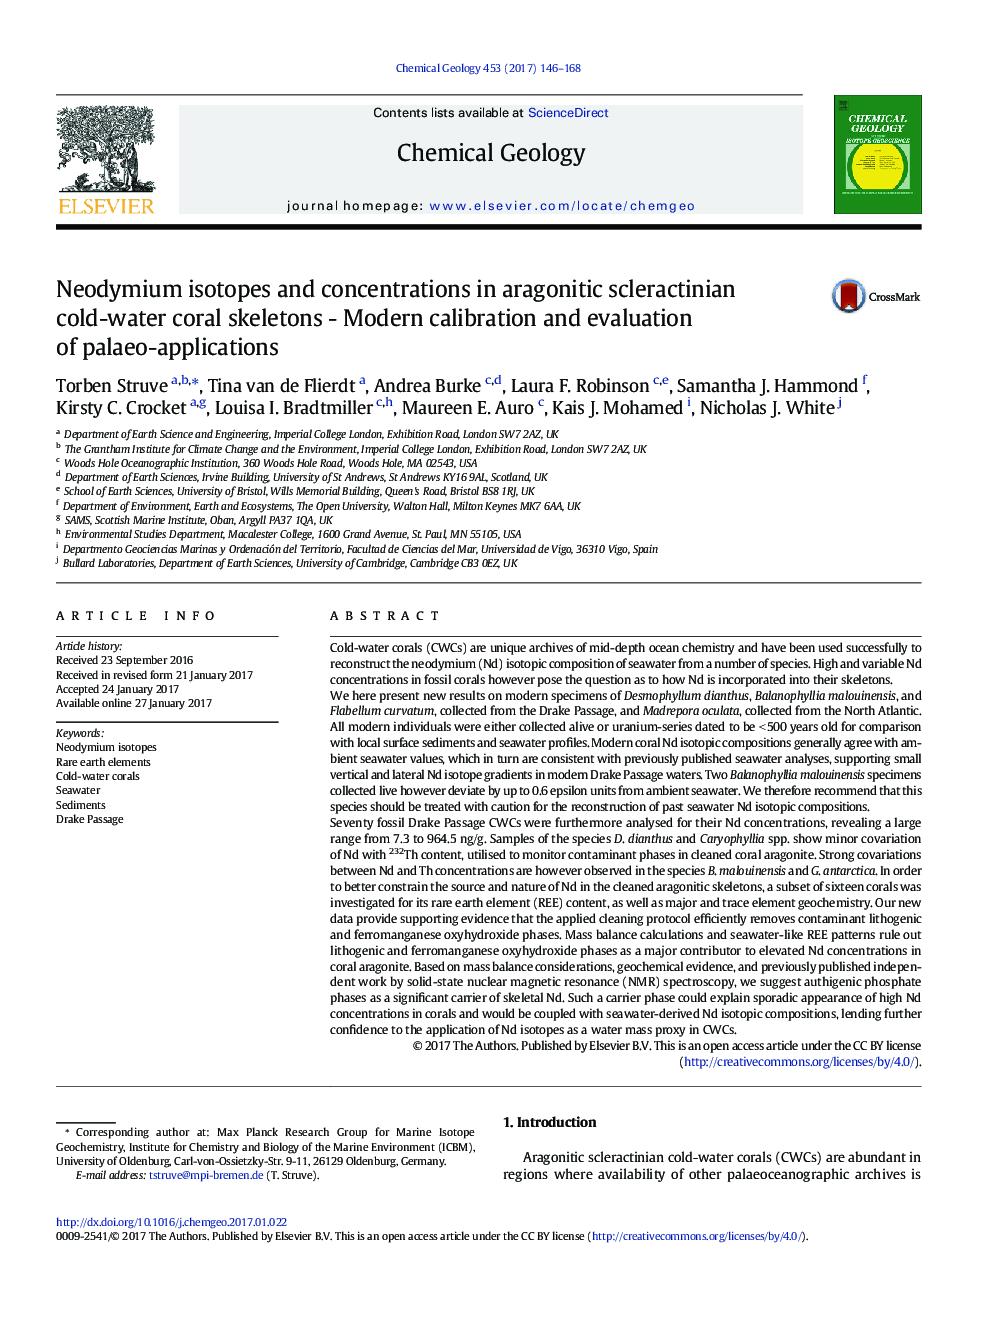 Neodymium isotopes and concentrations in aragonitic scleractinian cold-water coral skeletons - Modern calibration and evaluation of palaeo-applications